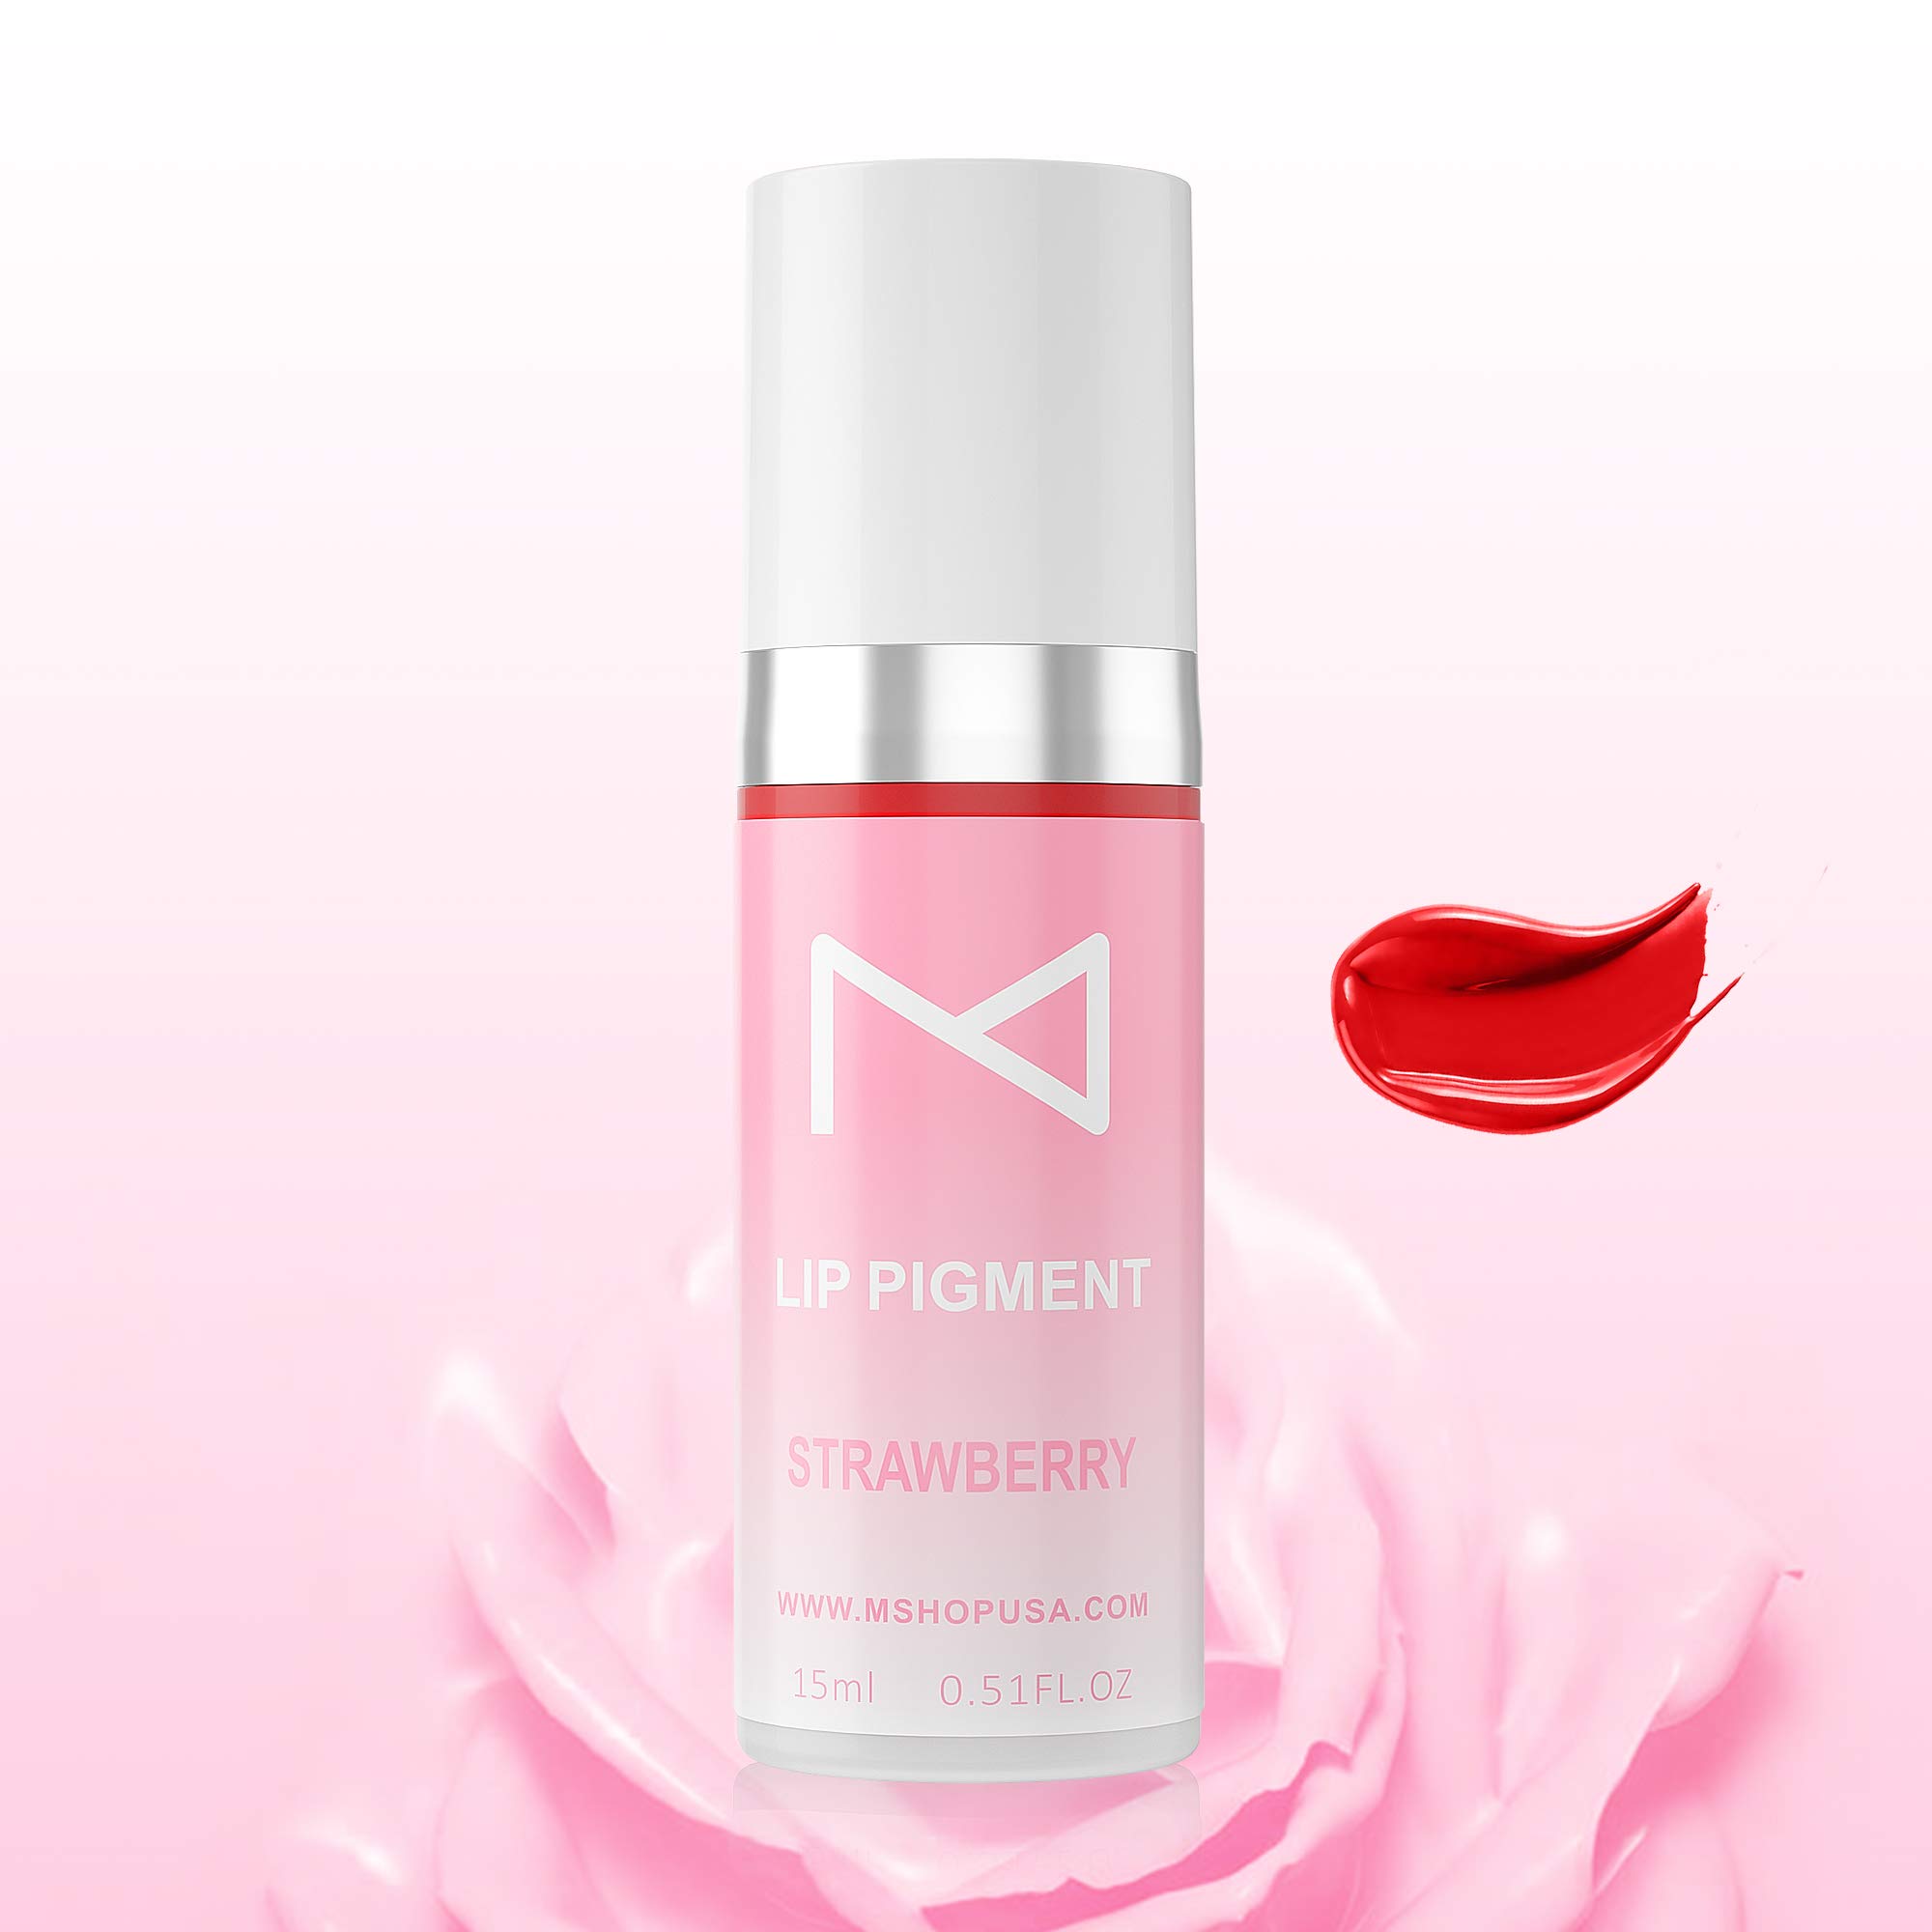 M Lip Semi Cream Pigment By Mellie Microblading For Lip Tattoo - Medical Grade - No Mixing - For Professionals Only -15ml (STRAWBERRY)